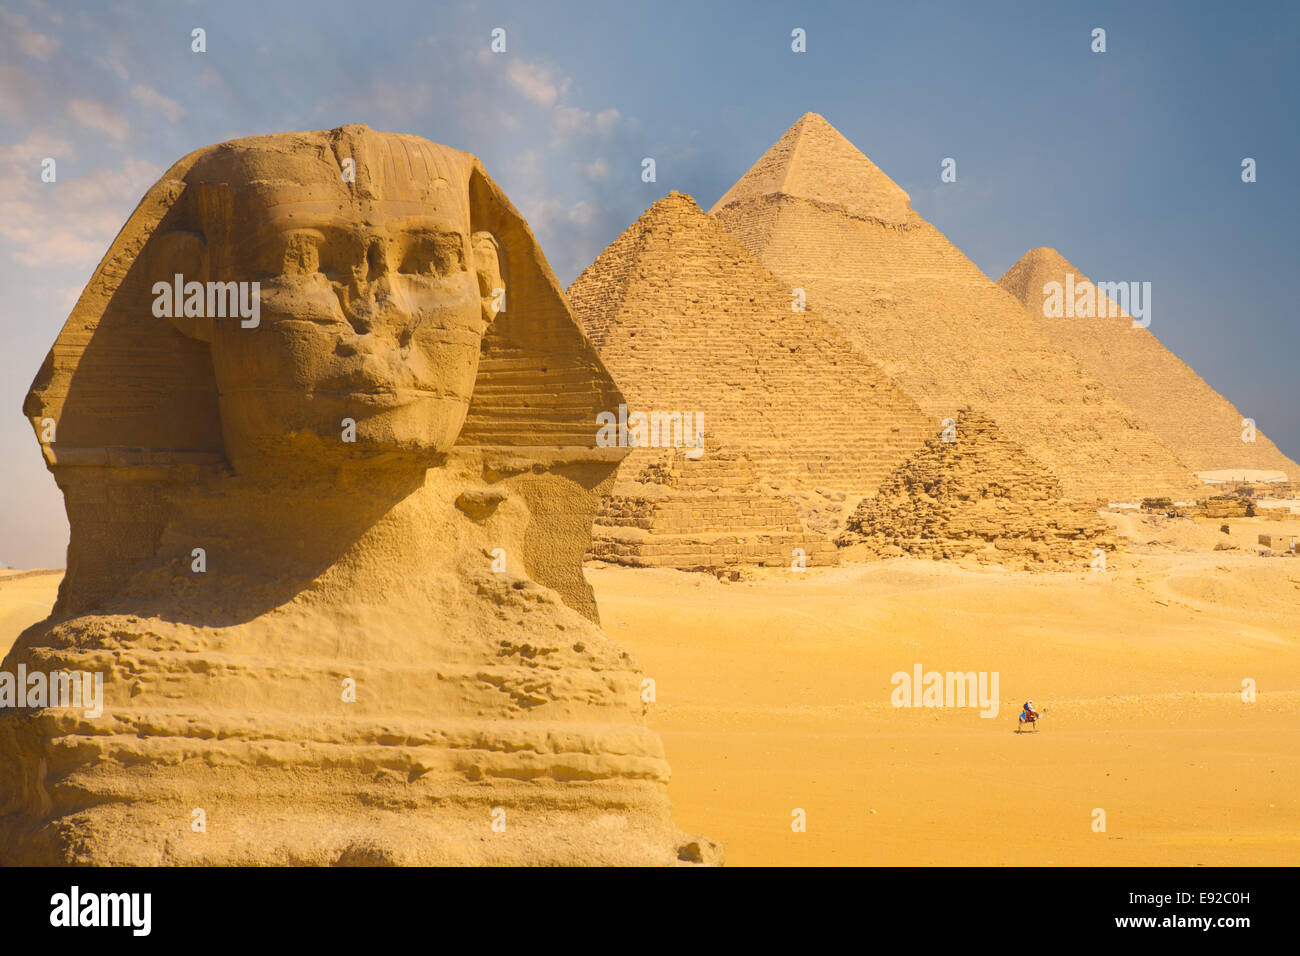 Great Sphinx Face Pyramids Background Stock Photo